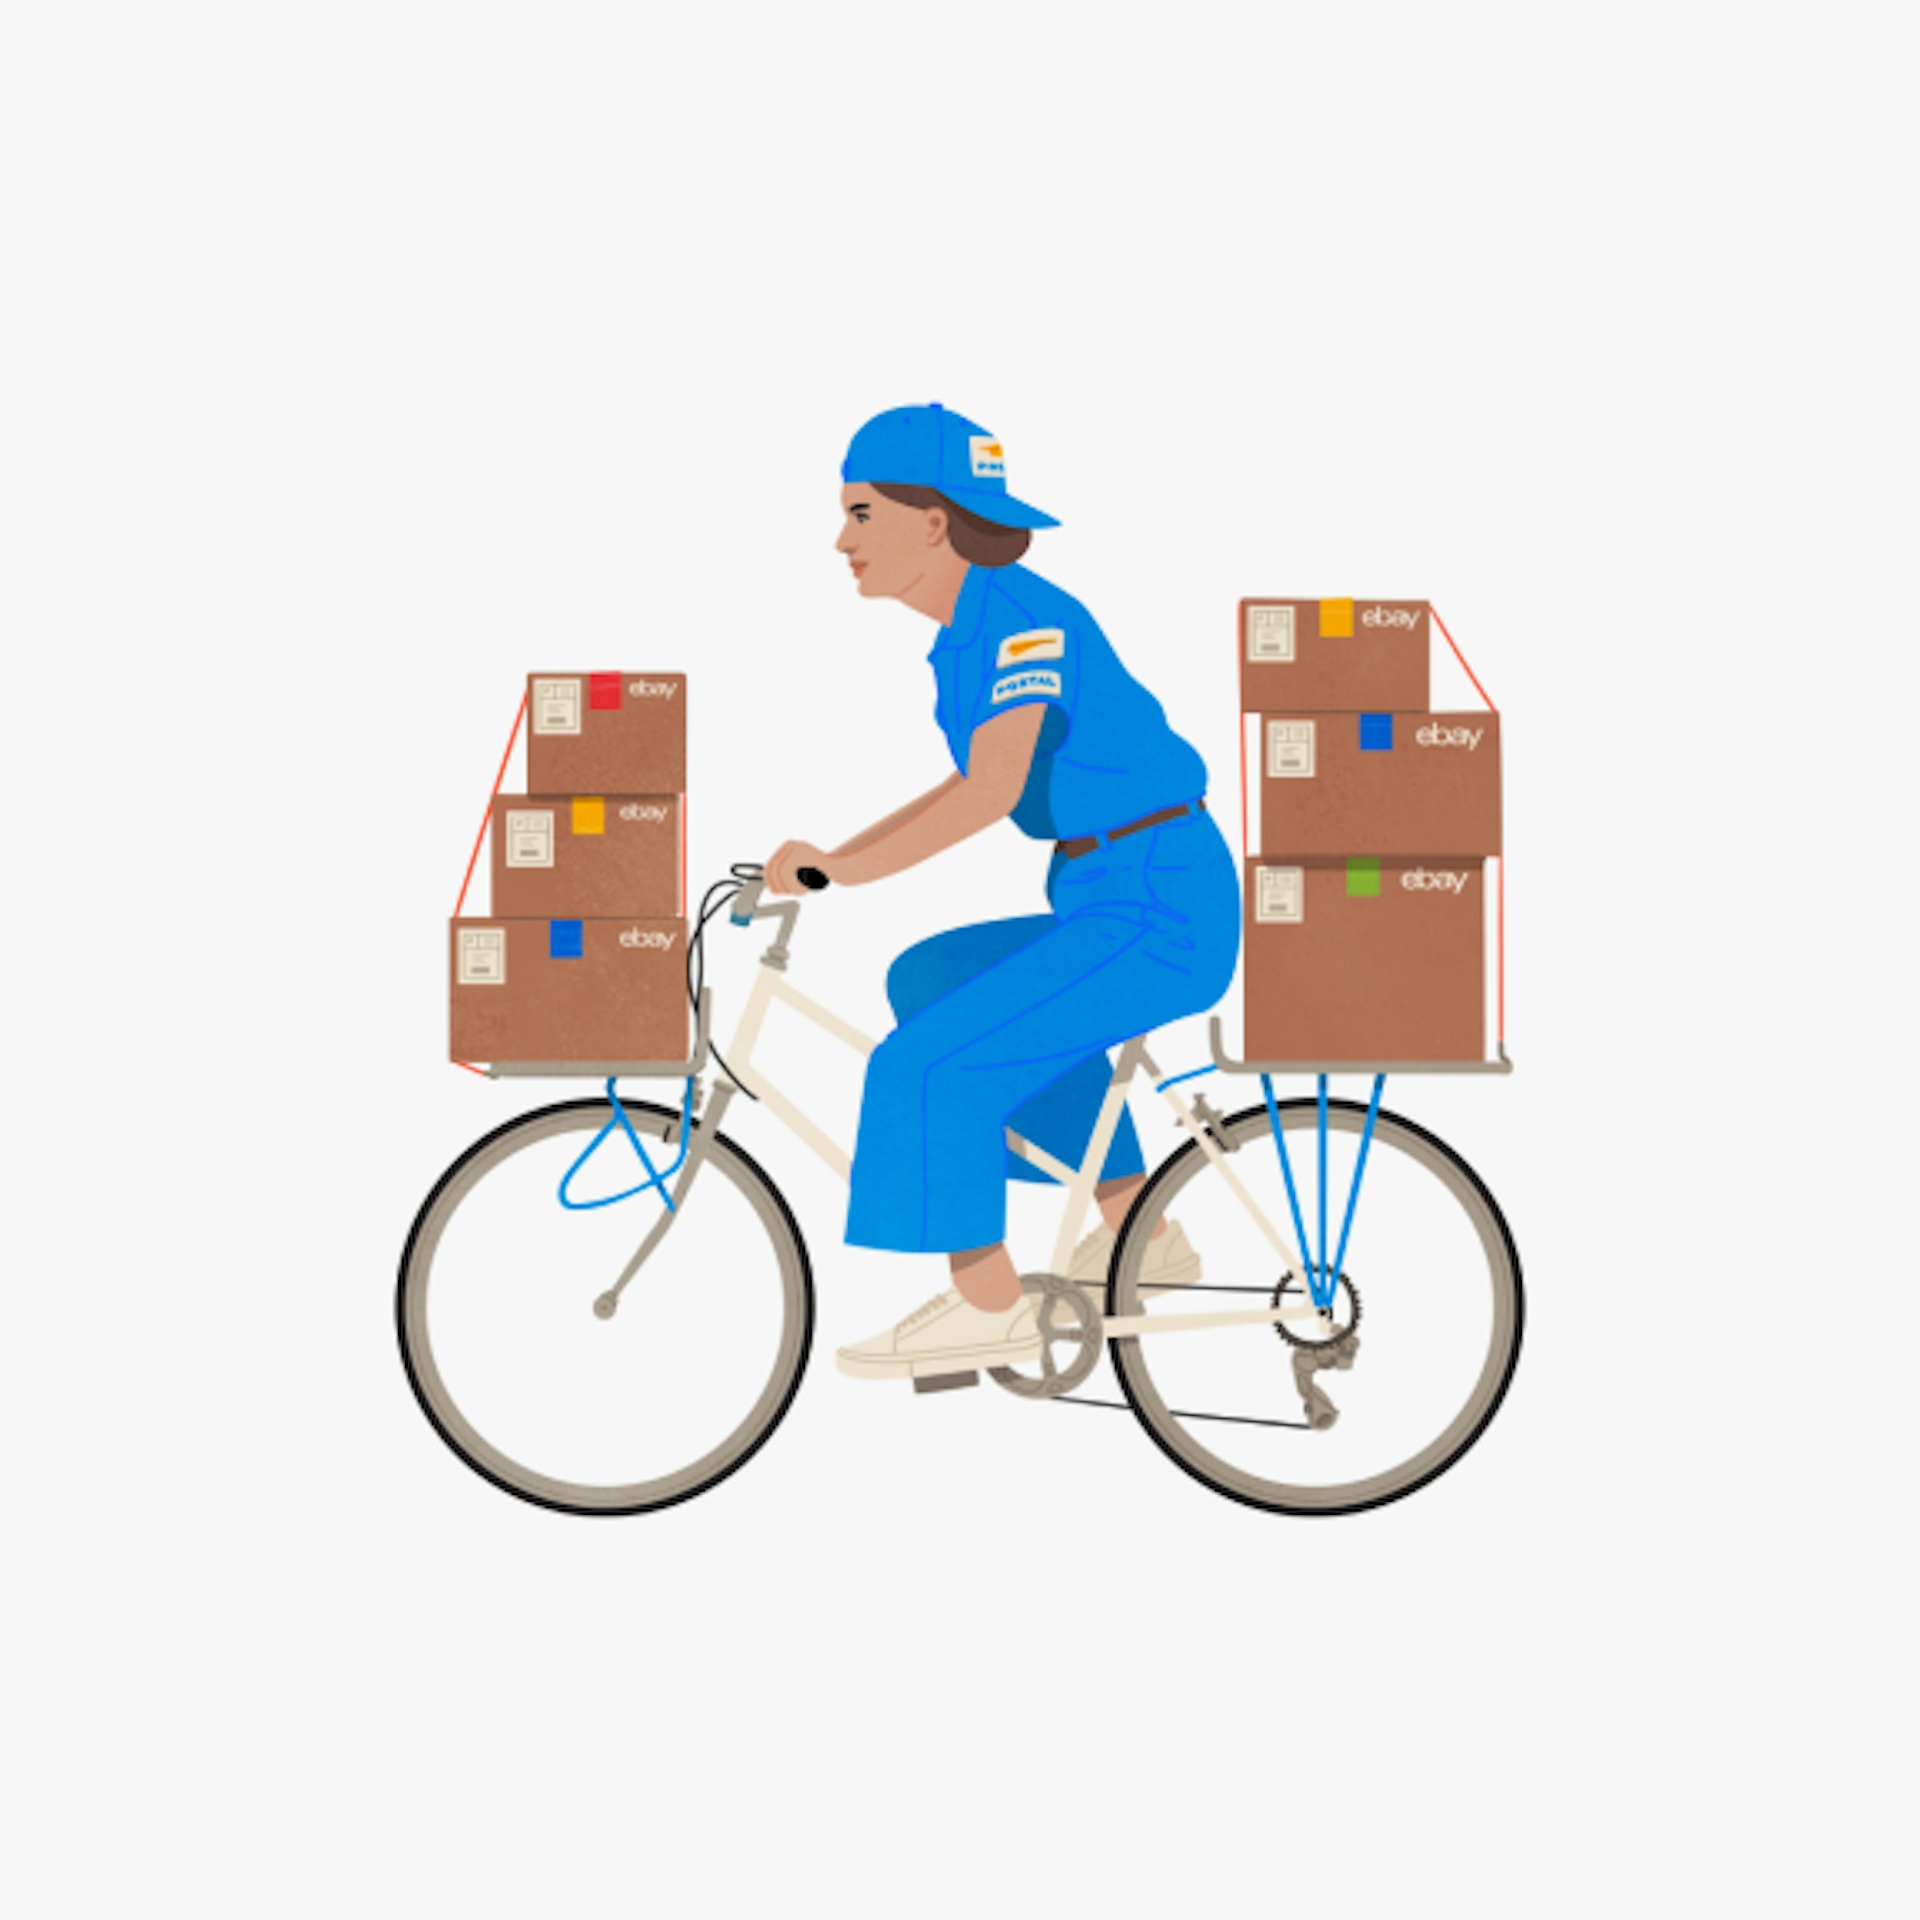 A postal worker in a blue uniform and cap is riding a bicycle, carrying several eBay-branded packages secured with red straps on both the front and rear of the bike.